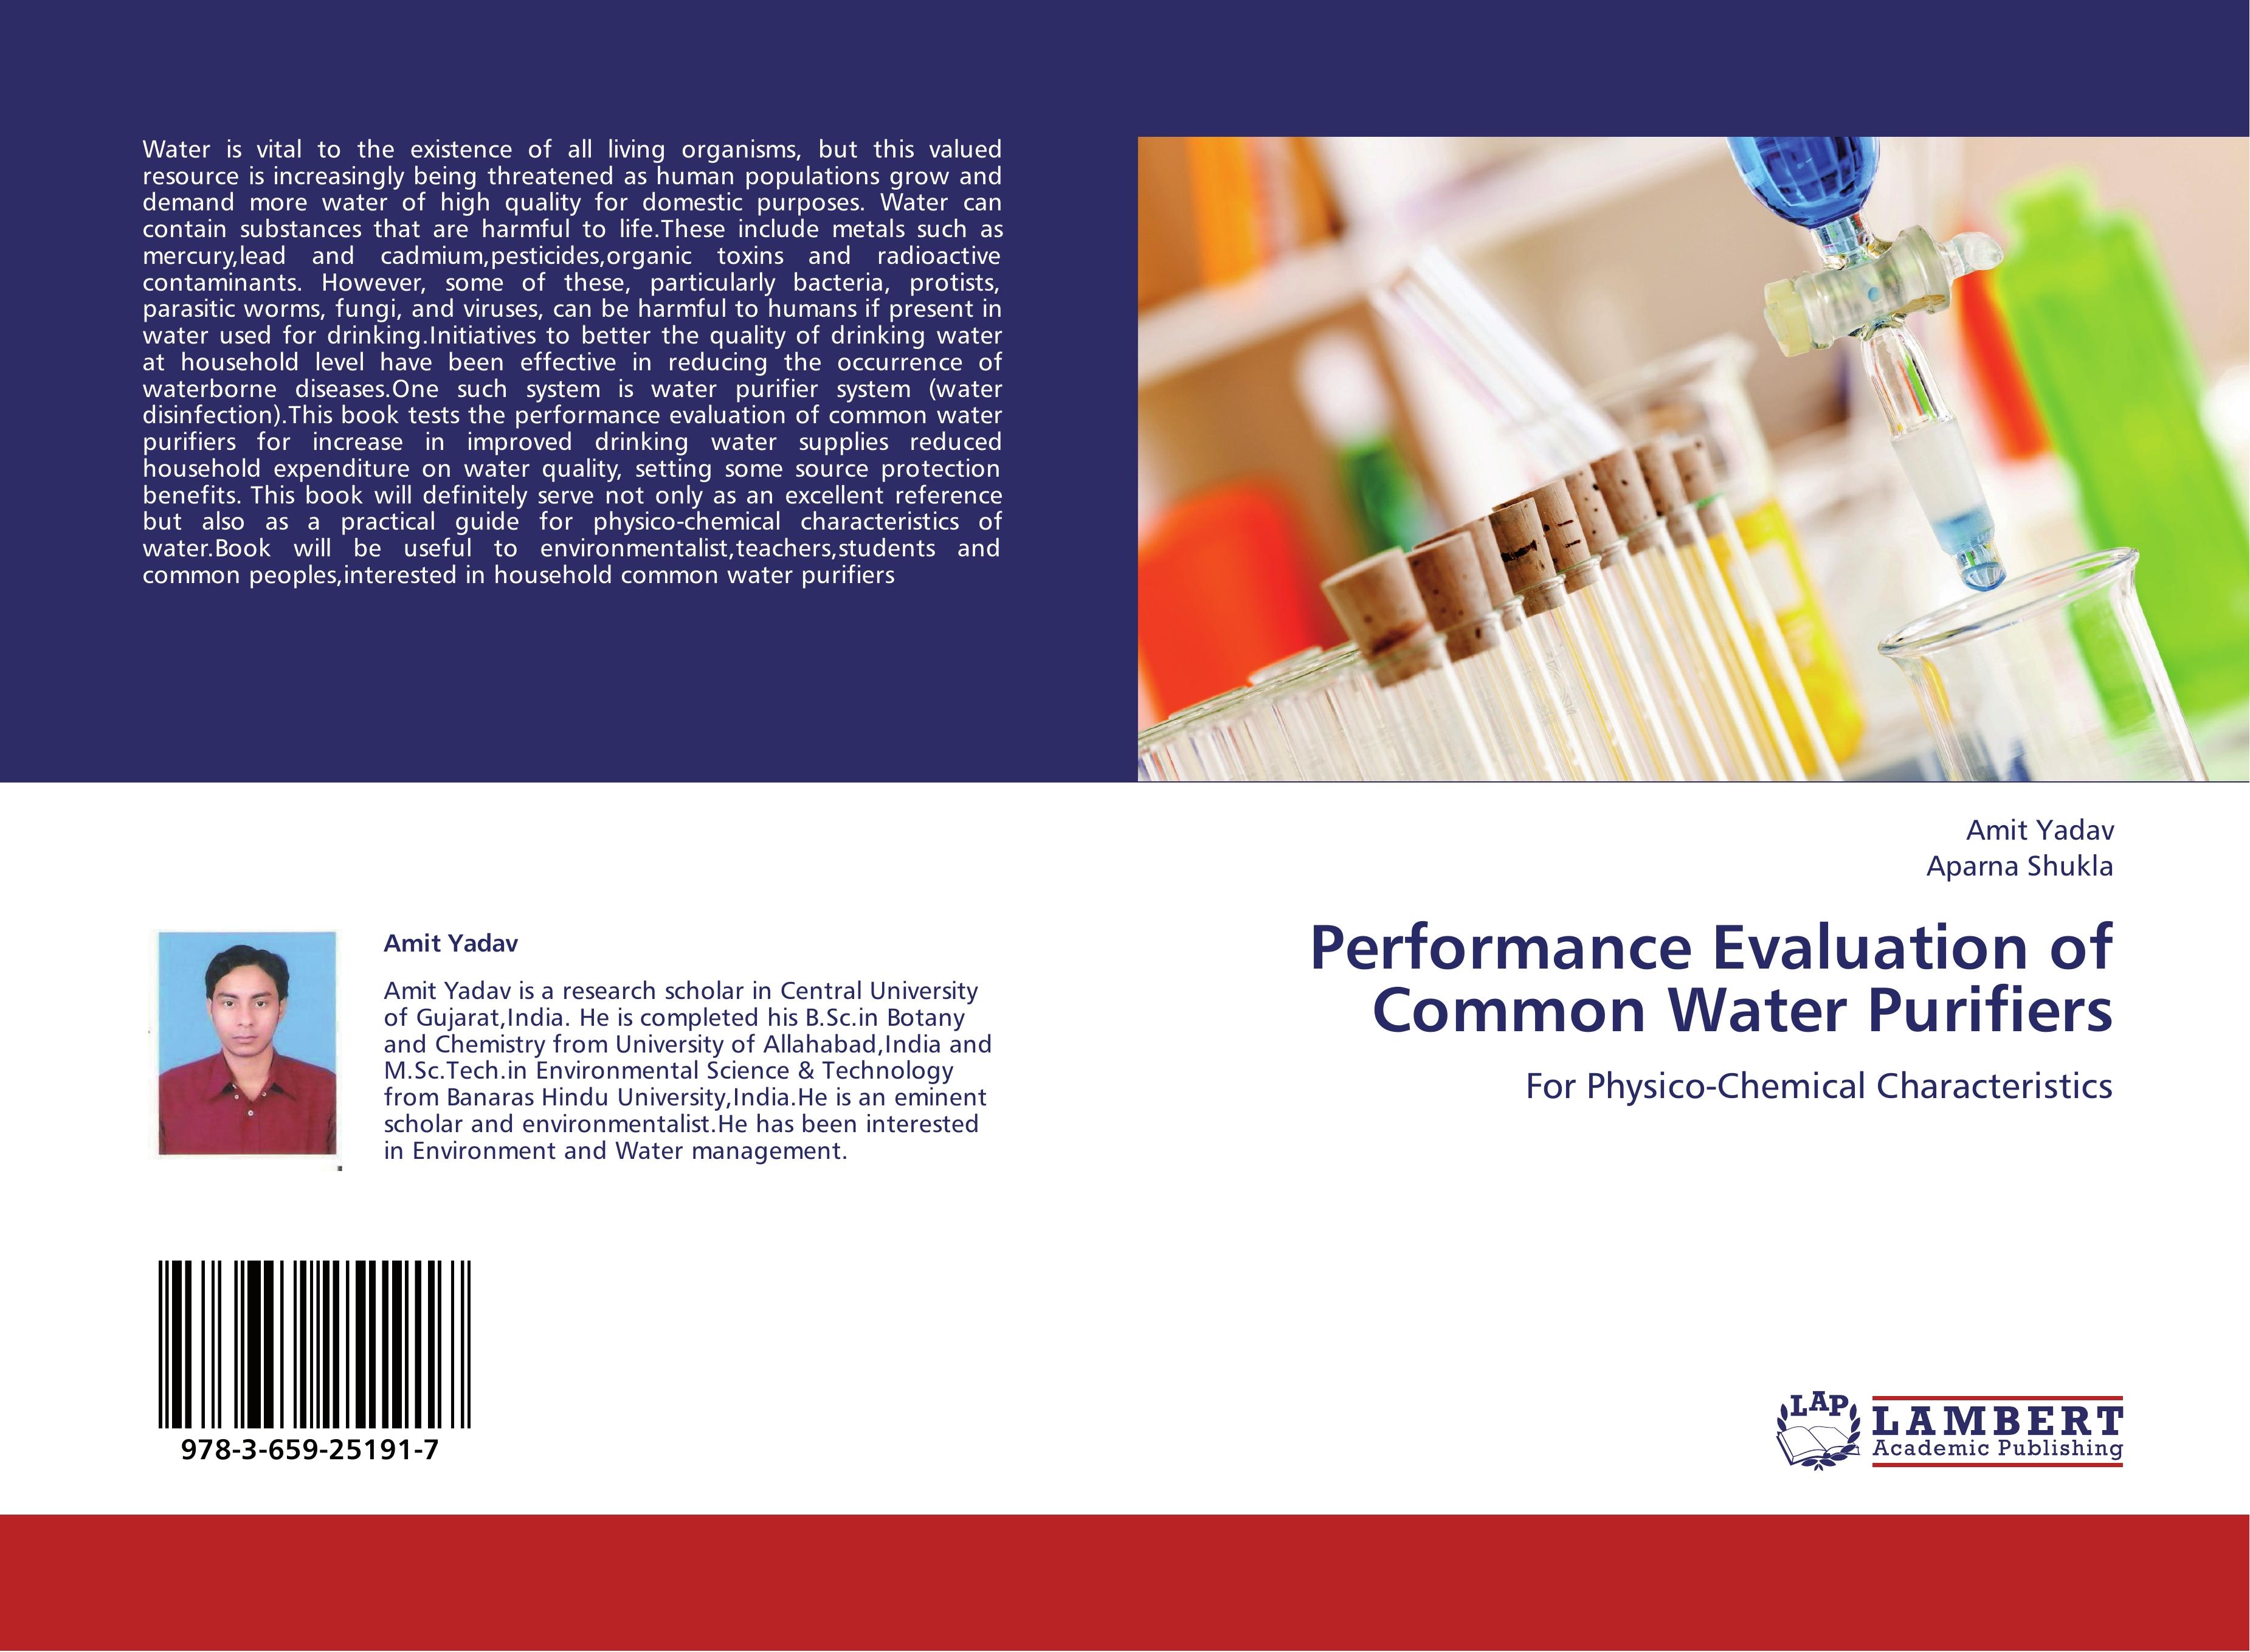 Performance Evaluation of Common Water Purifiers / For Physico-Chemical Characteristics / Amit Yadav (u. a.) / Taschenbuch / Paperback / 56 S. / Englisch / 2012 / LAP LAMBERT Academic Publishing - Yadav, Amit